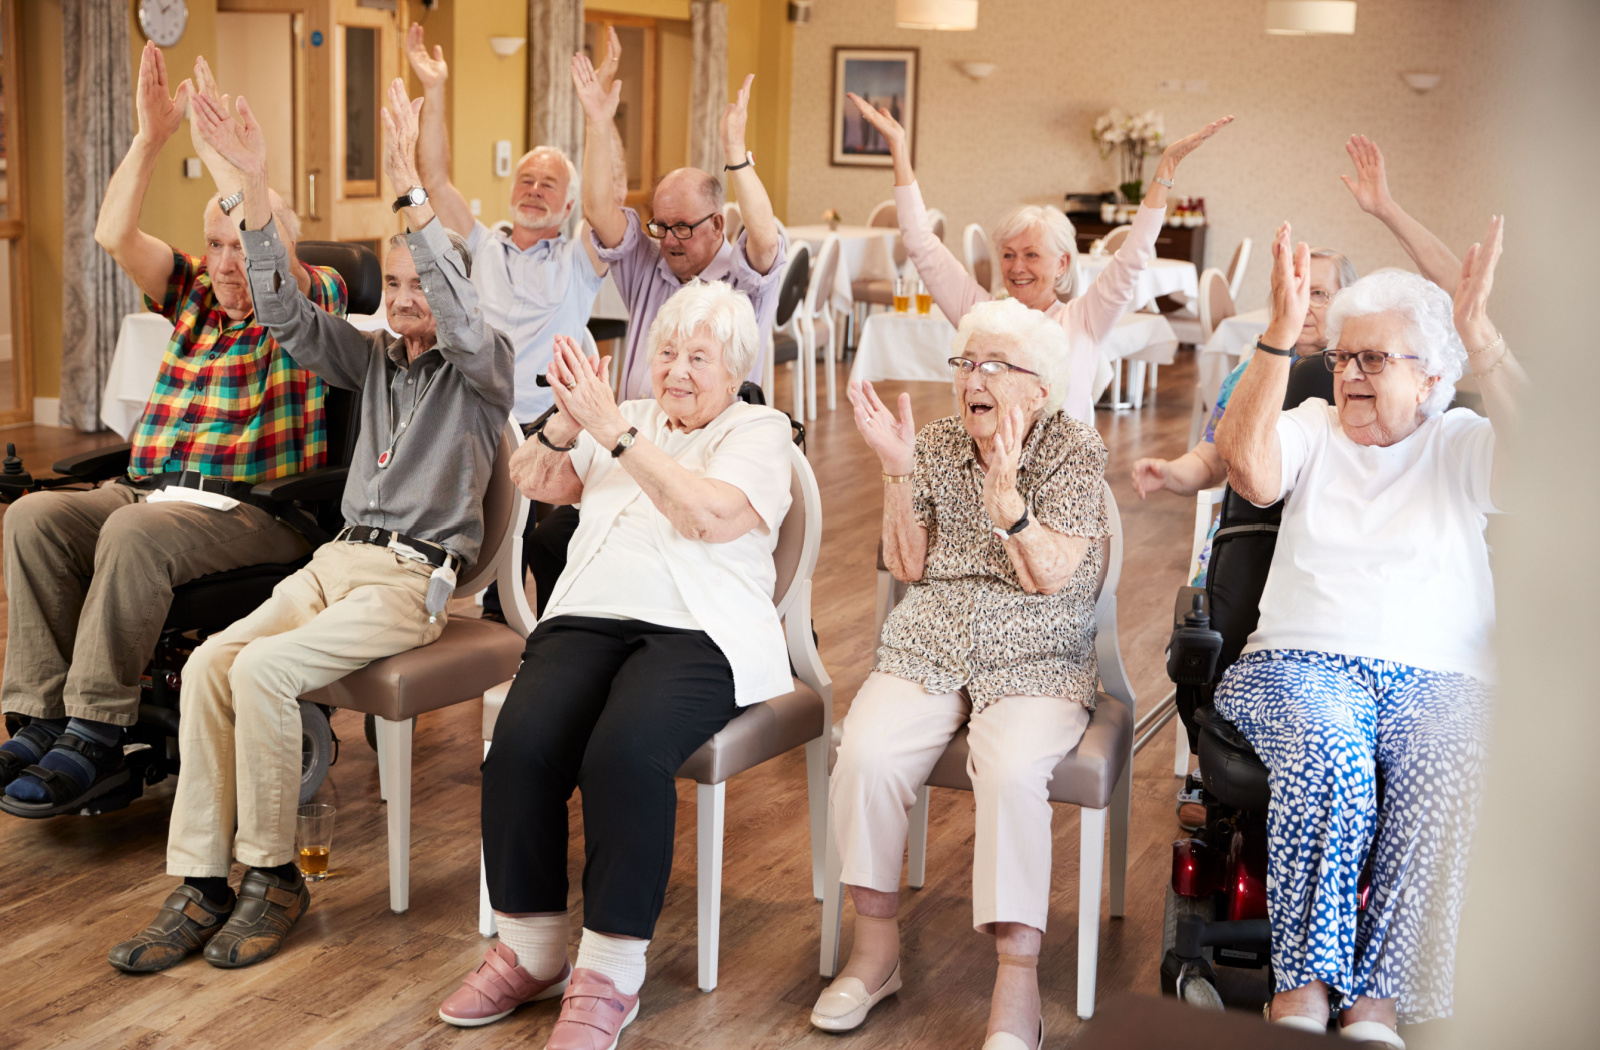 A group of seniors in a senior living facility sitting and exercising together.